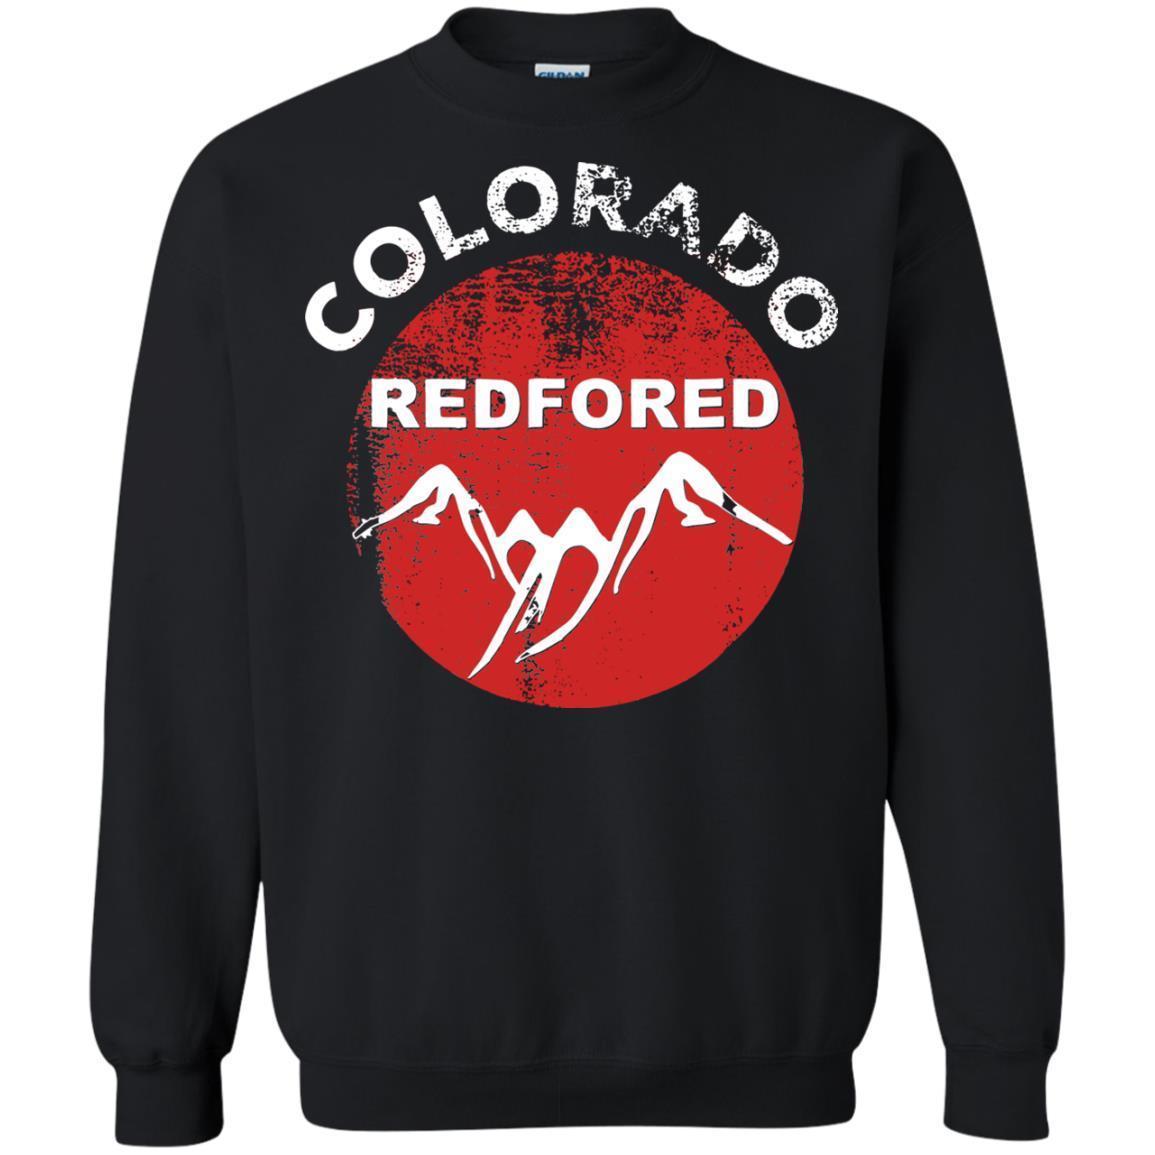 Cover Your Body With Amazing Shirt Red For Ed Colorado Shirt - Tea Protest 